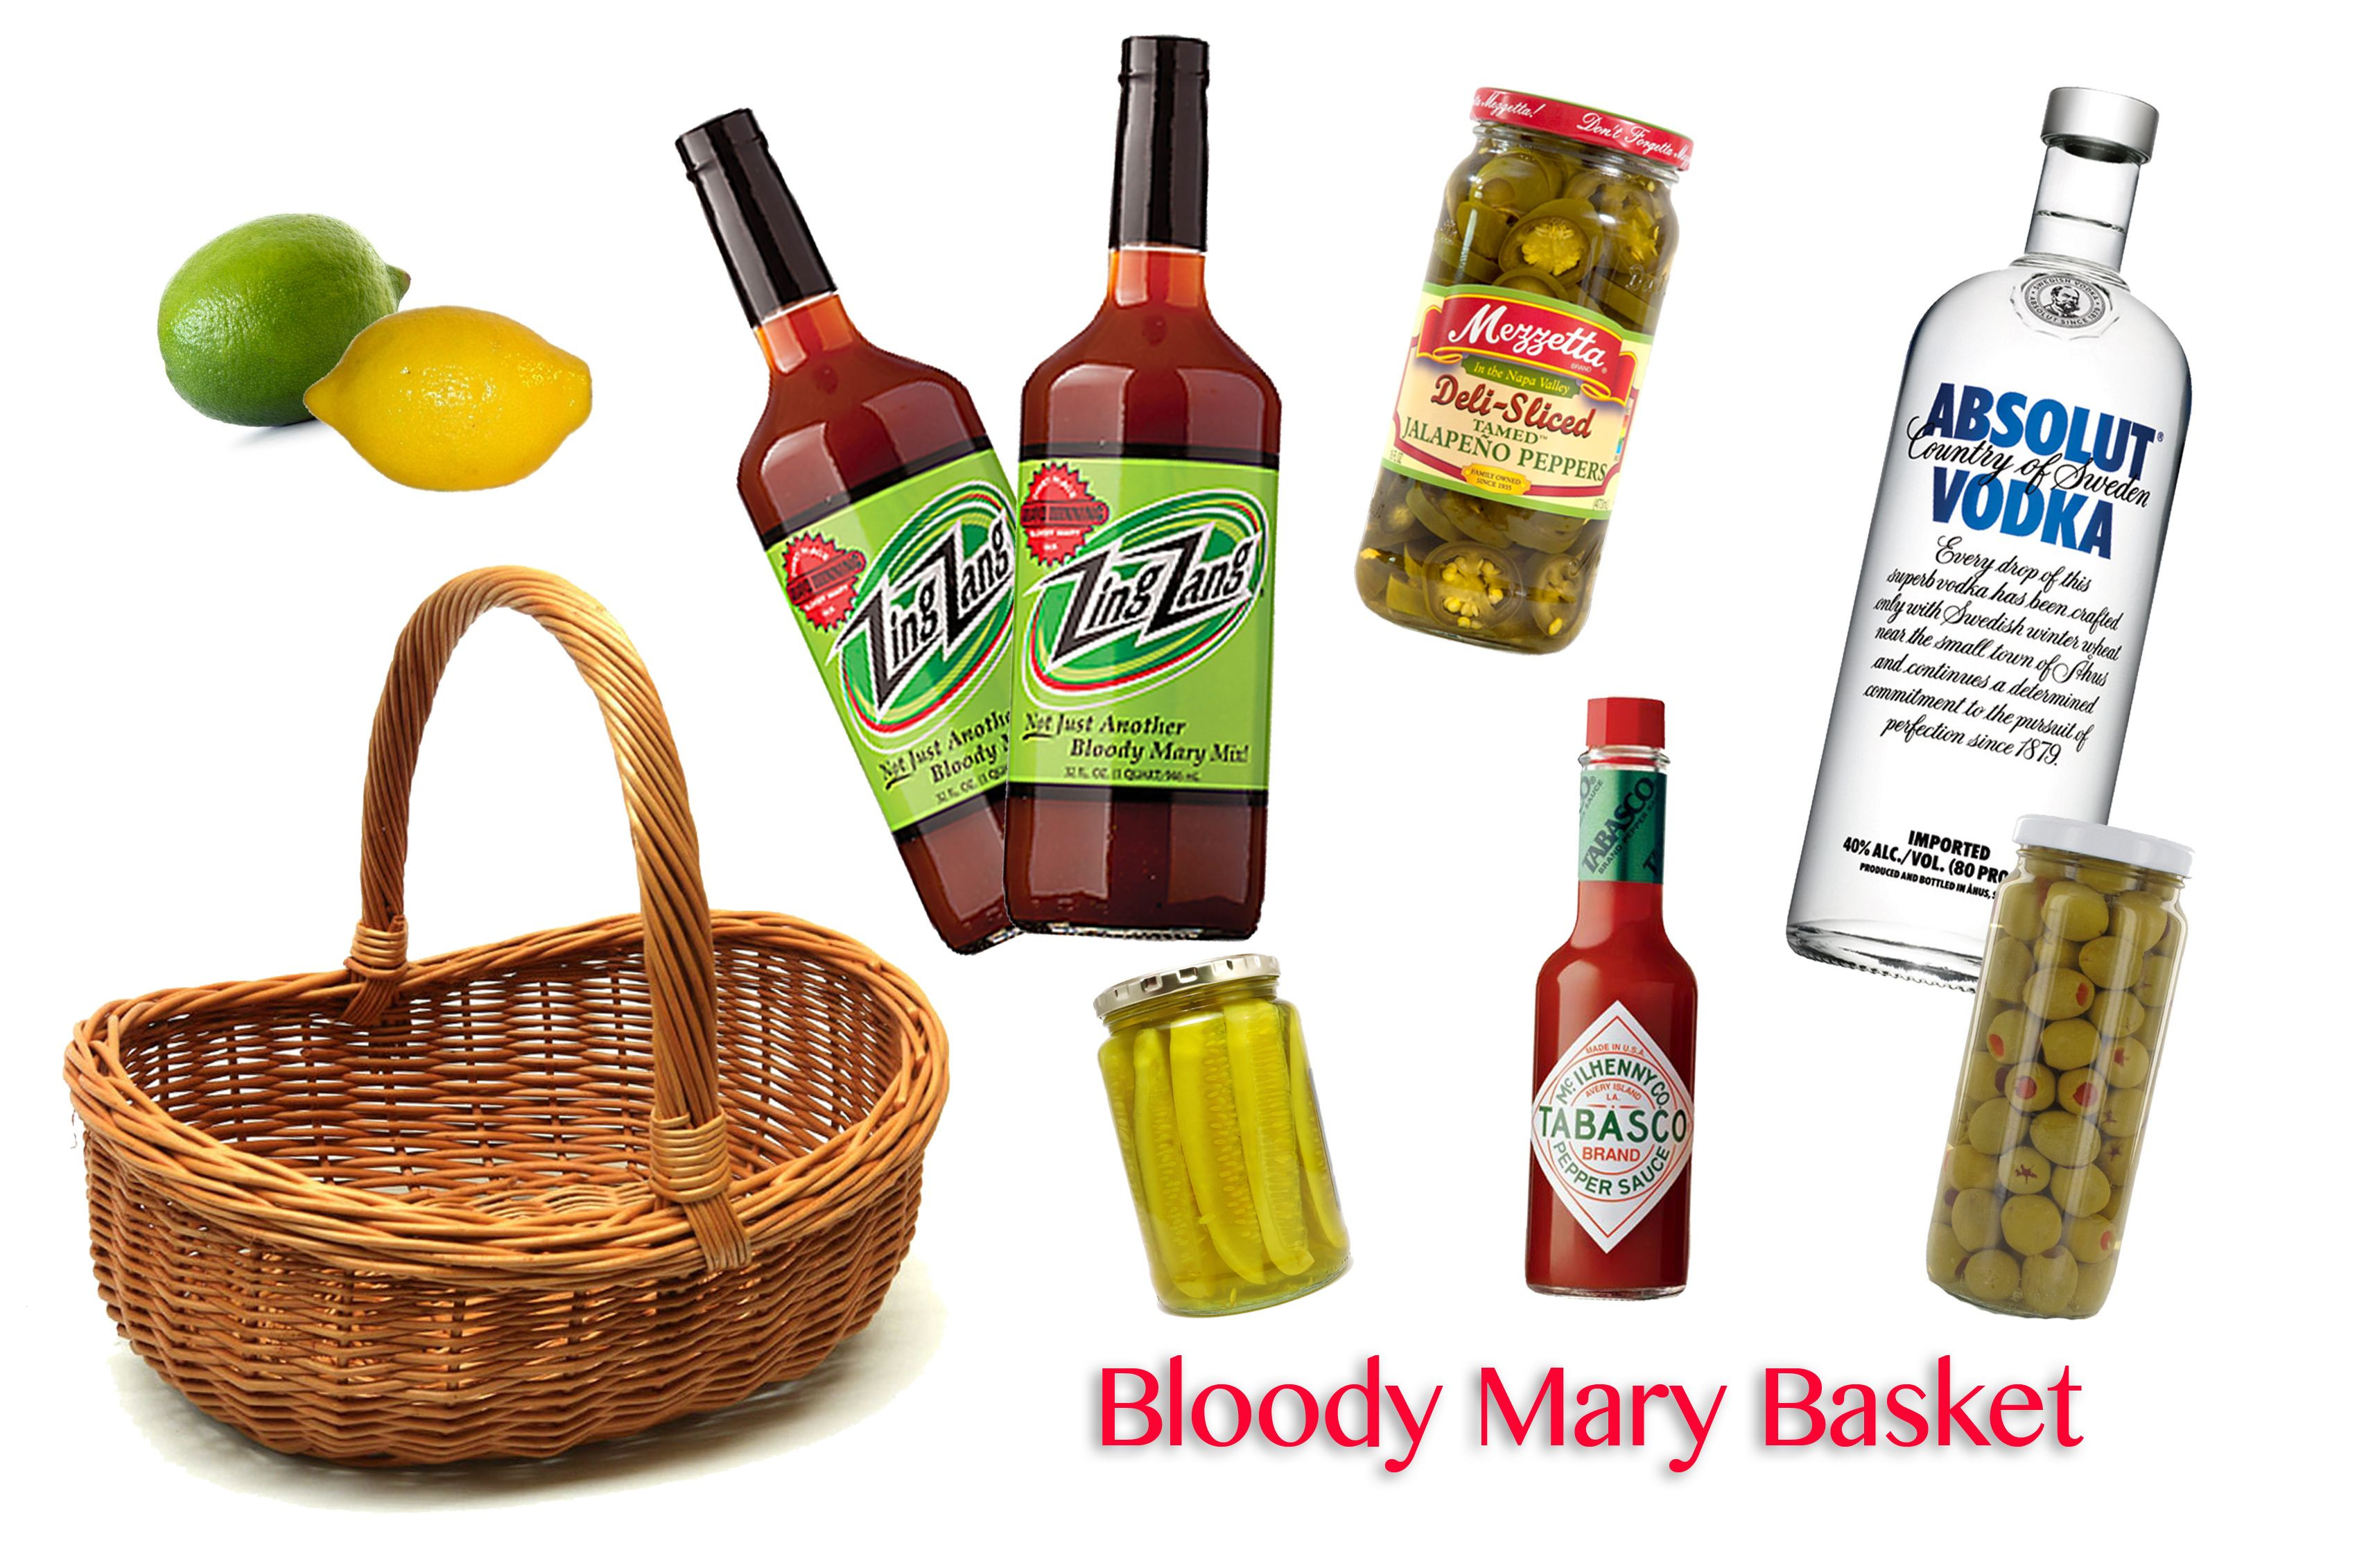 Bloody Mary Gift Basket Ideas
 bloody mary t basket ideas Google Search